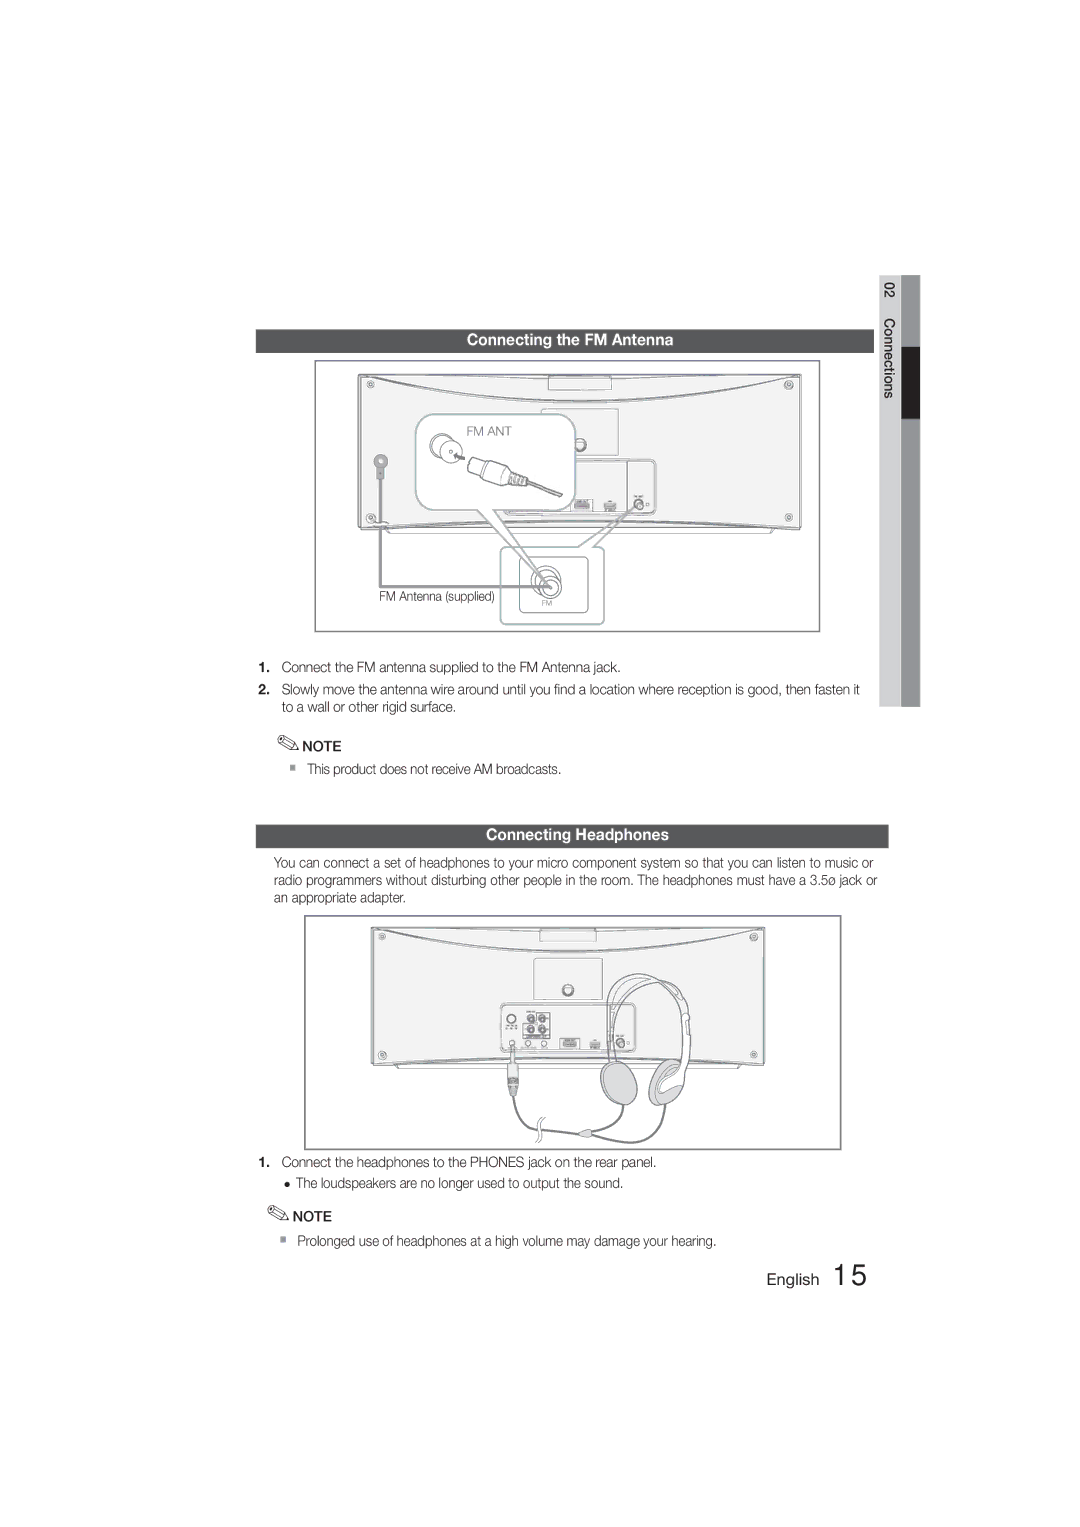 Samsung MM-D470D/XE, MM-D470D/XN, MM-D470D/EN, MM-D470D/ZF manual Connecting the FM Antenna, Connecting Headphones 